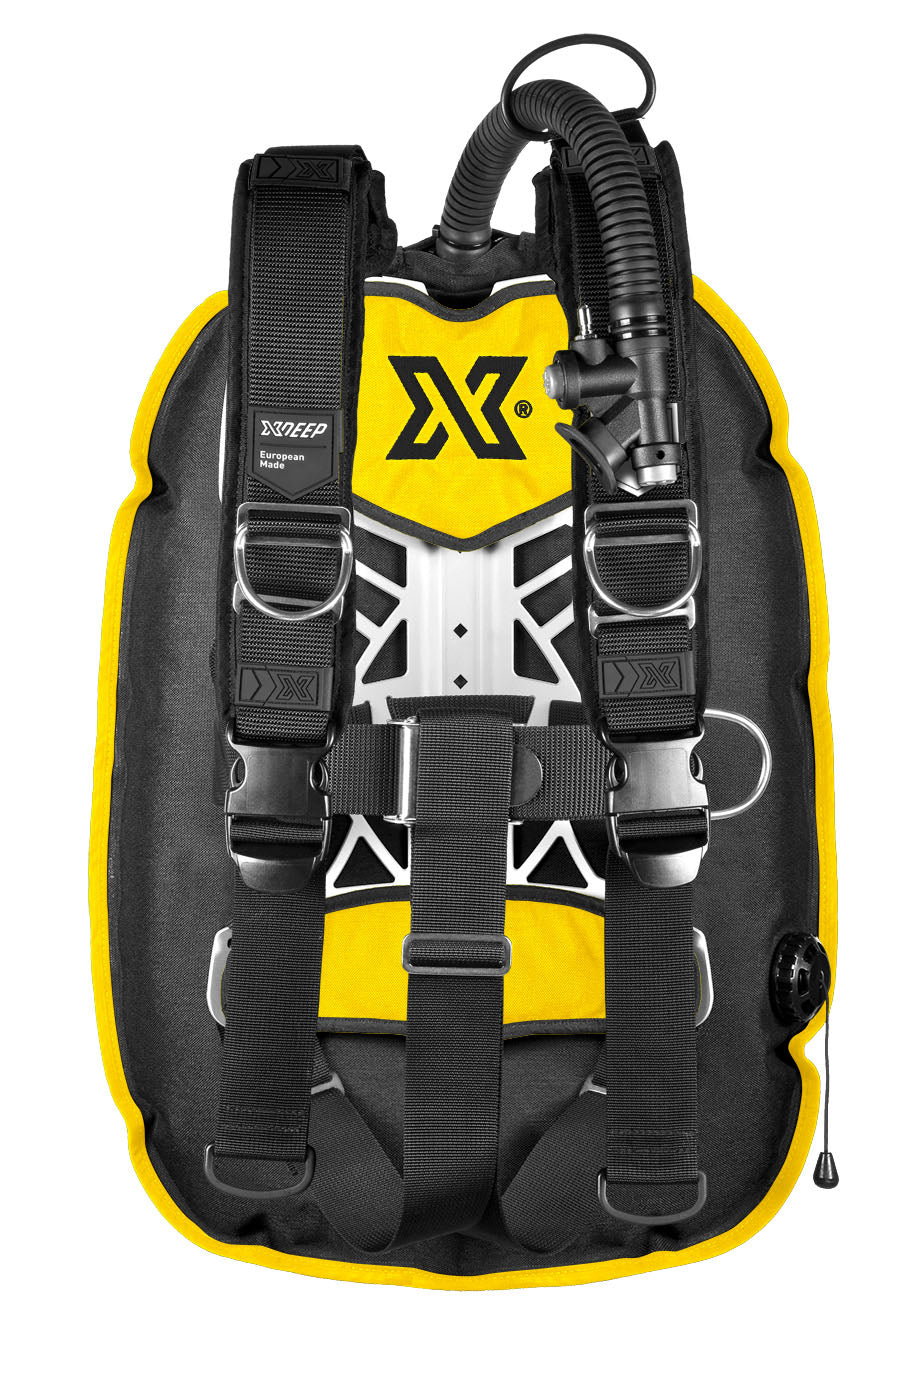 XDEEP XDEEP GHOST Full Setup with Standard or Deluxe harness Yellow / Deluxe / Small - Oyster Diving